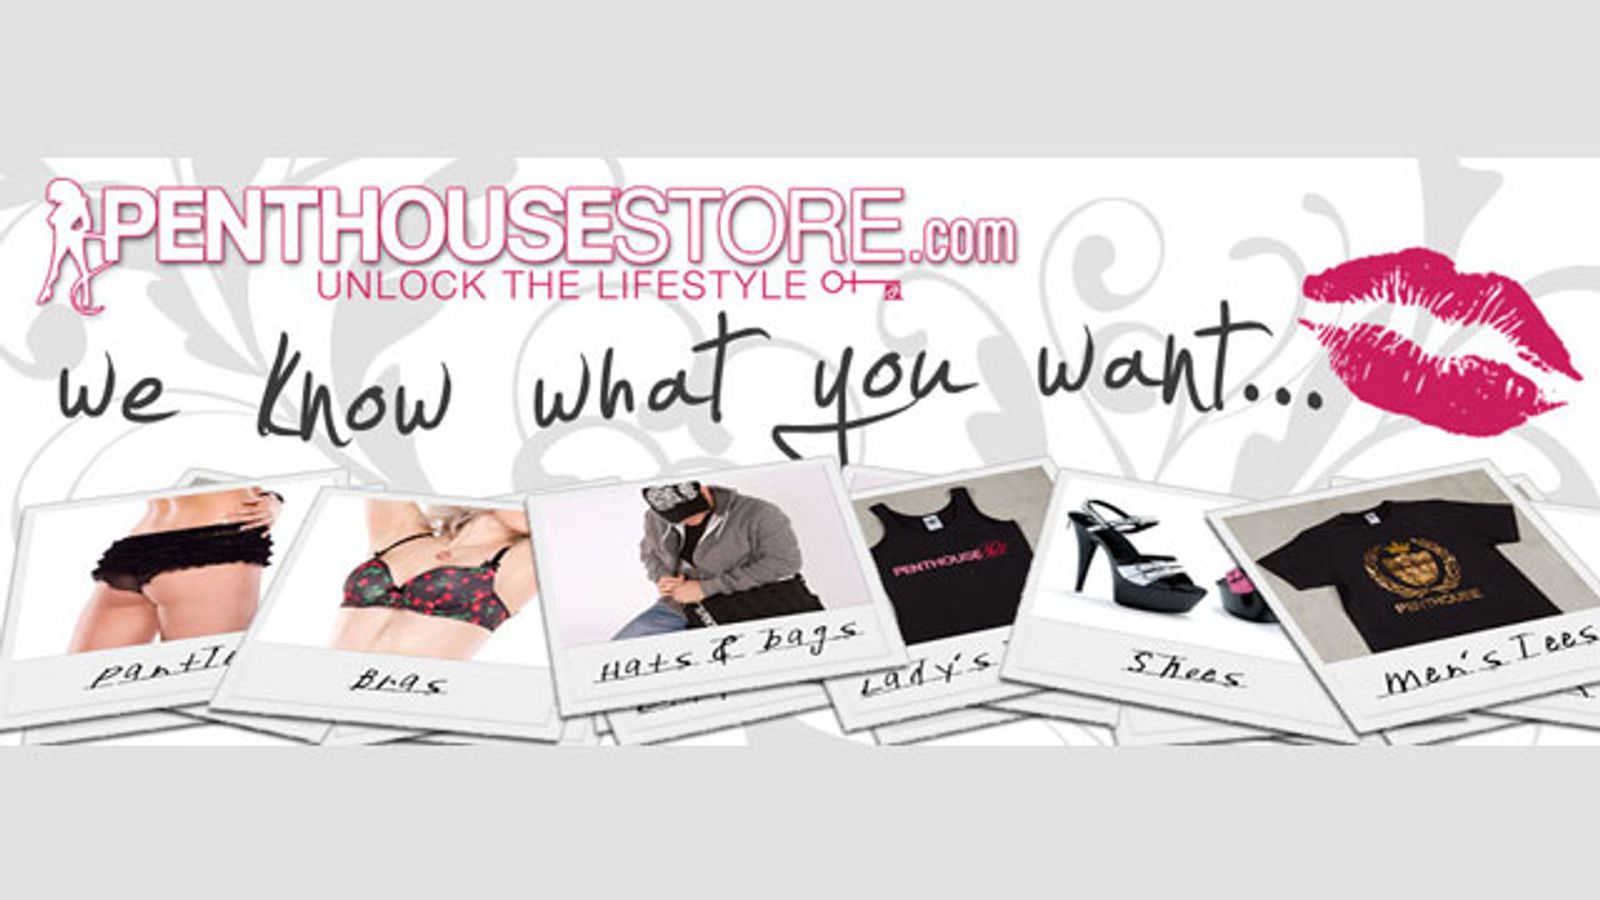 Penthouse Redesigns, Relaunches PenthouseStore.com